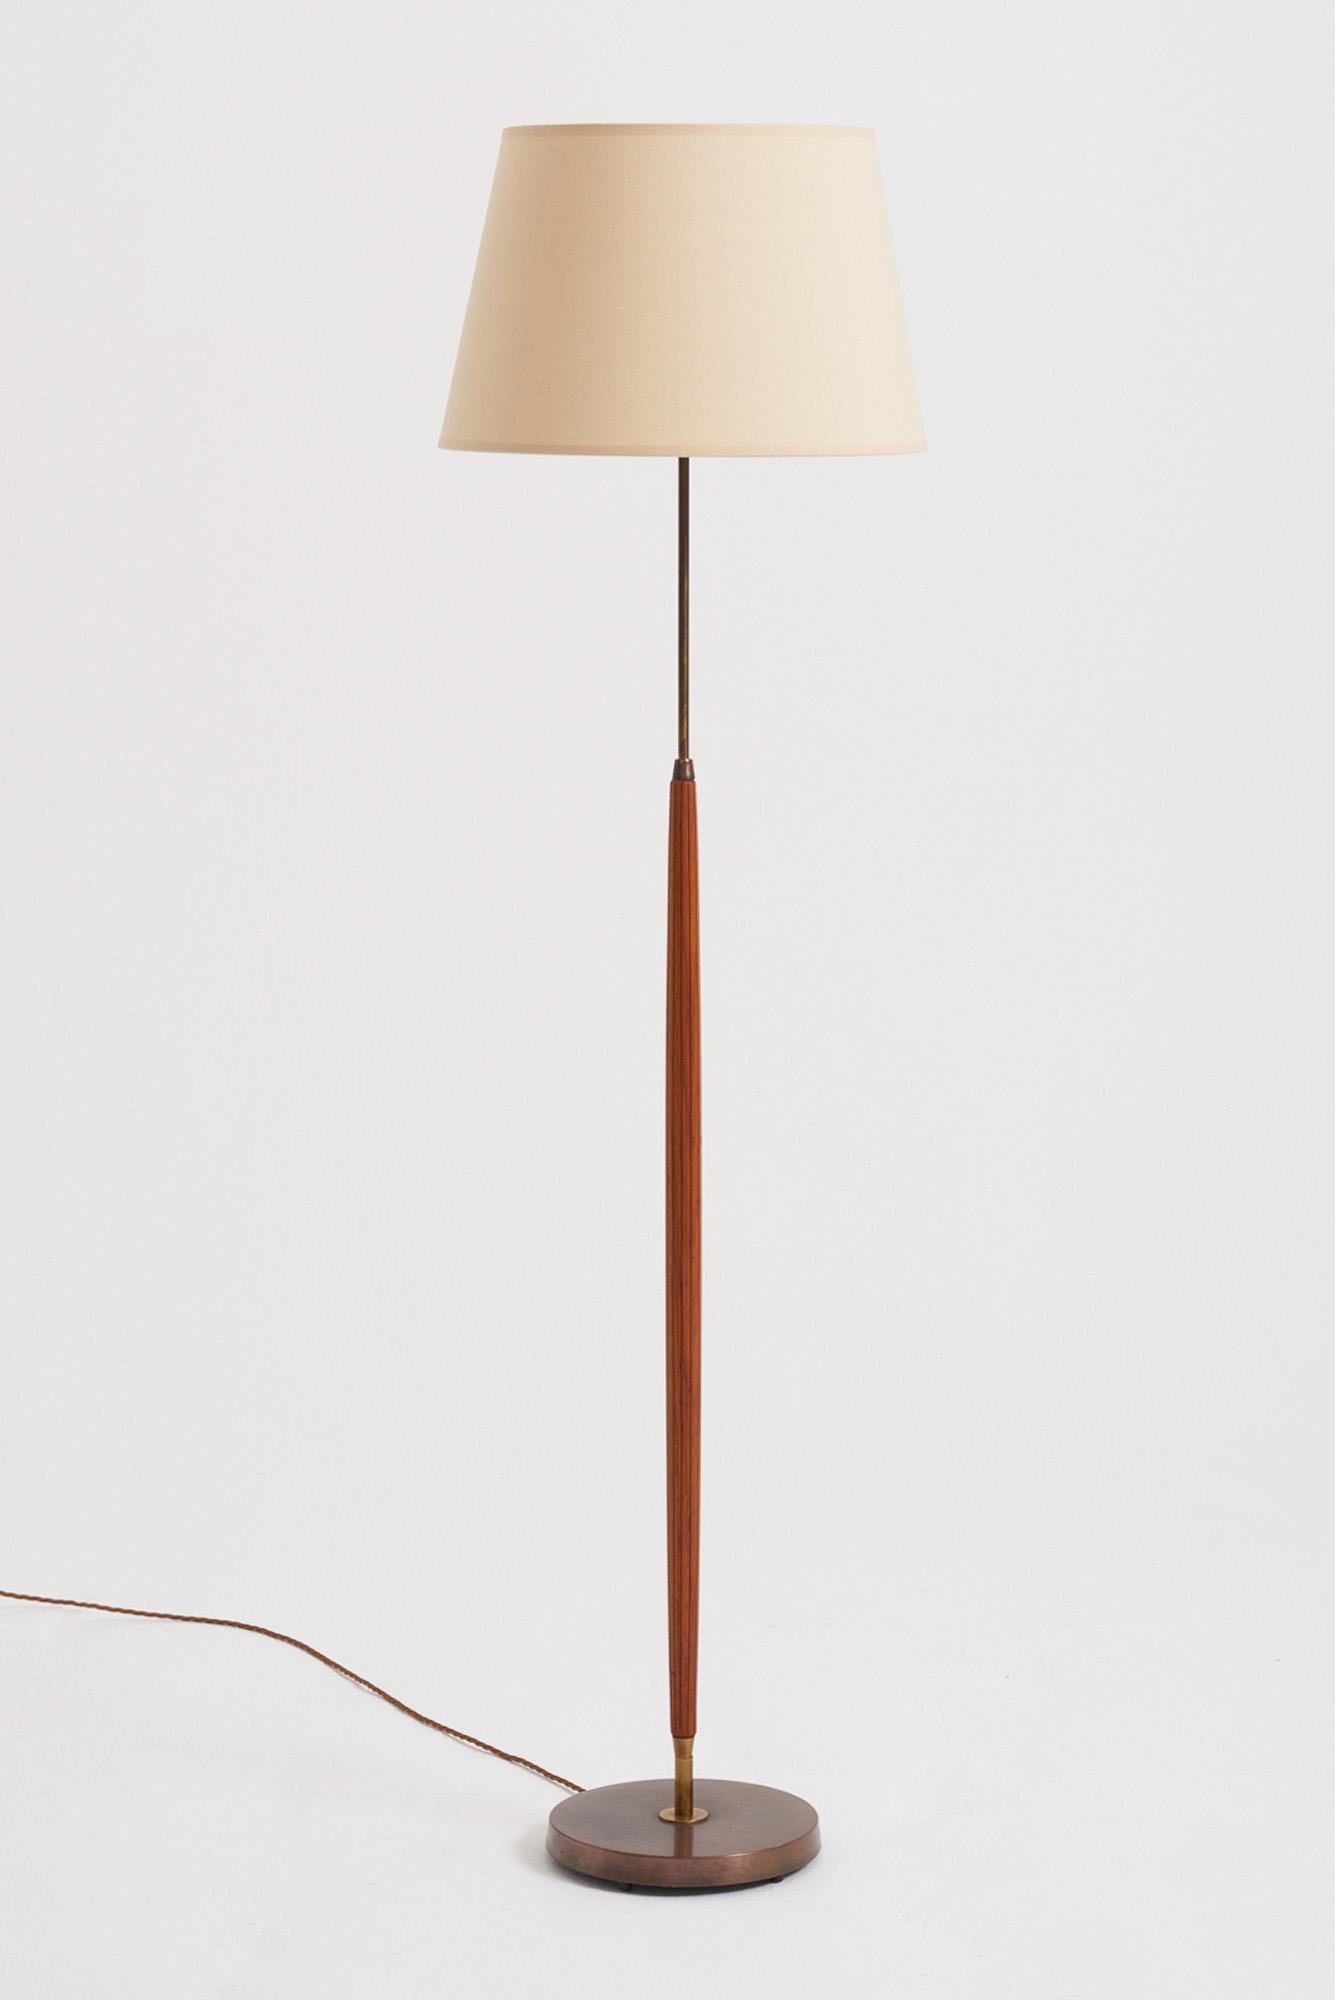 A brass and beech floor lamp by Falkenbergs Belysning. 
Sweden, third quarter of the 20th Century
With the shade: 153 cm high by 46 cm diameter
Lamp base only: 127 cm high by 24 cm diameter